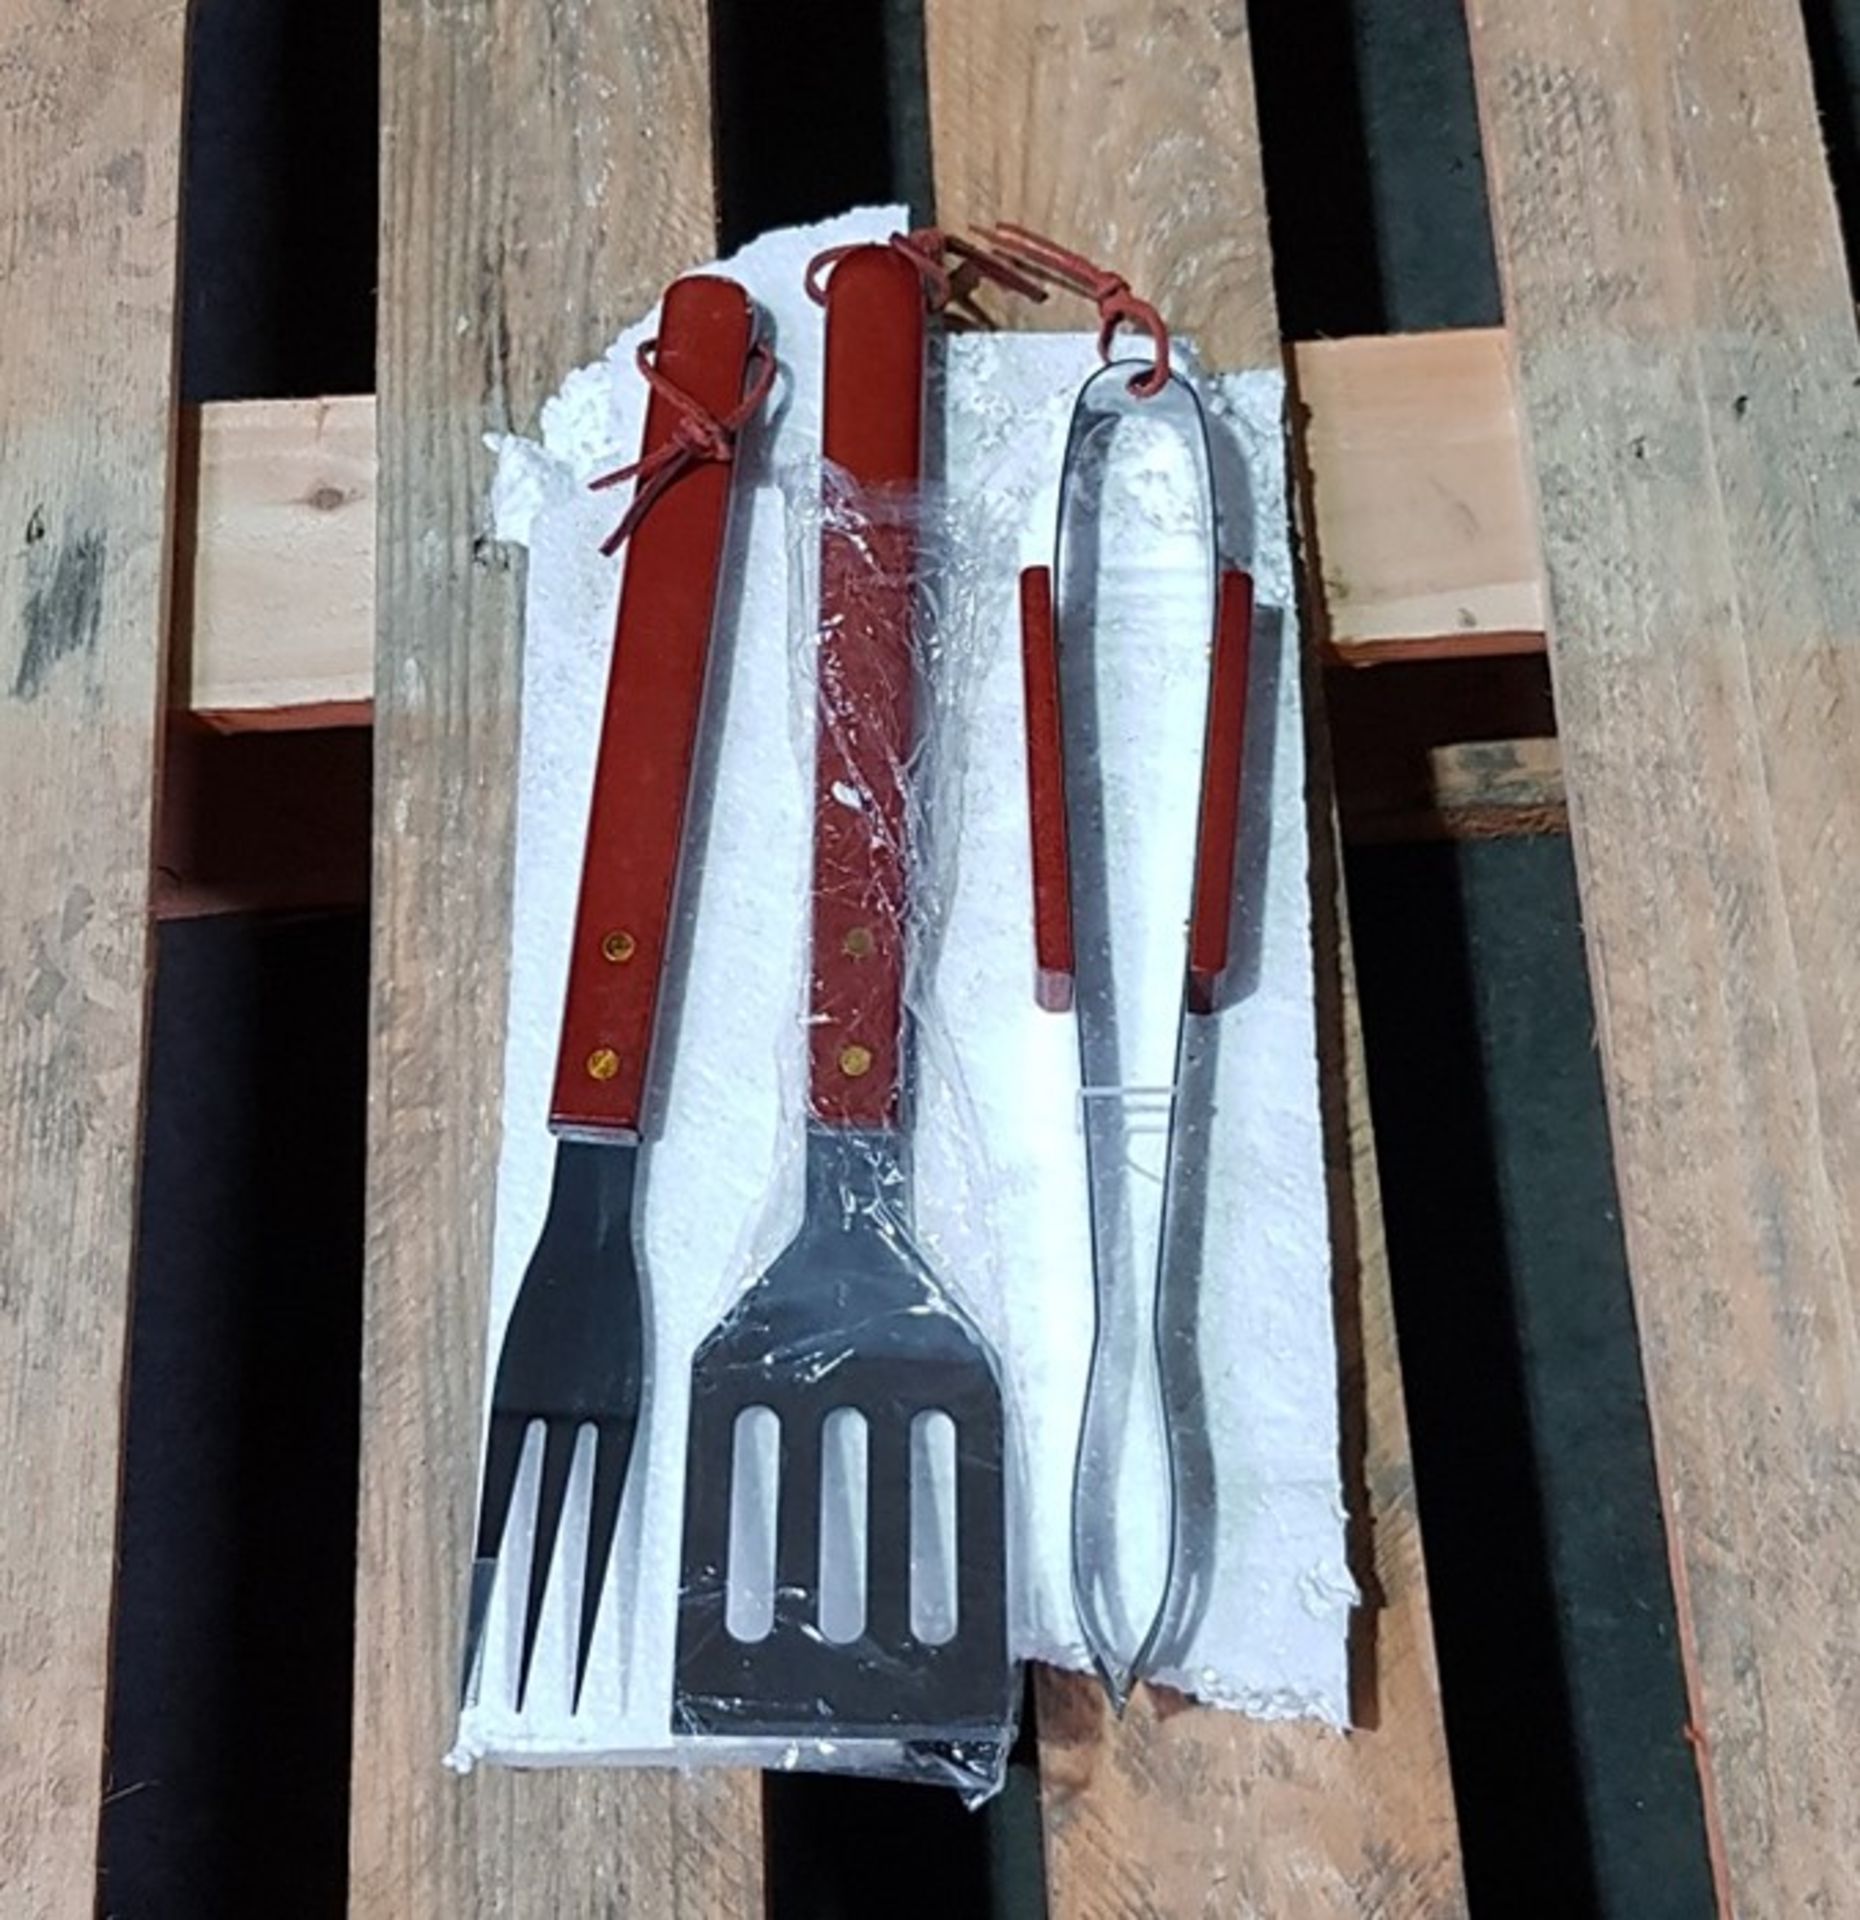 1 LOT TO CONTAIN GRADE B LA REDOUTE BBQ UTENSIL SET / QTY - 3 PIECES / RRP £29.99 (VIEWING HIGHLY